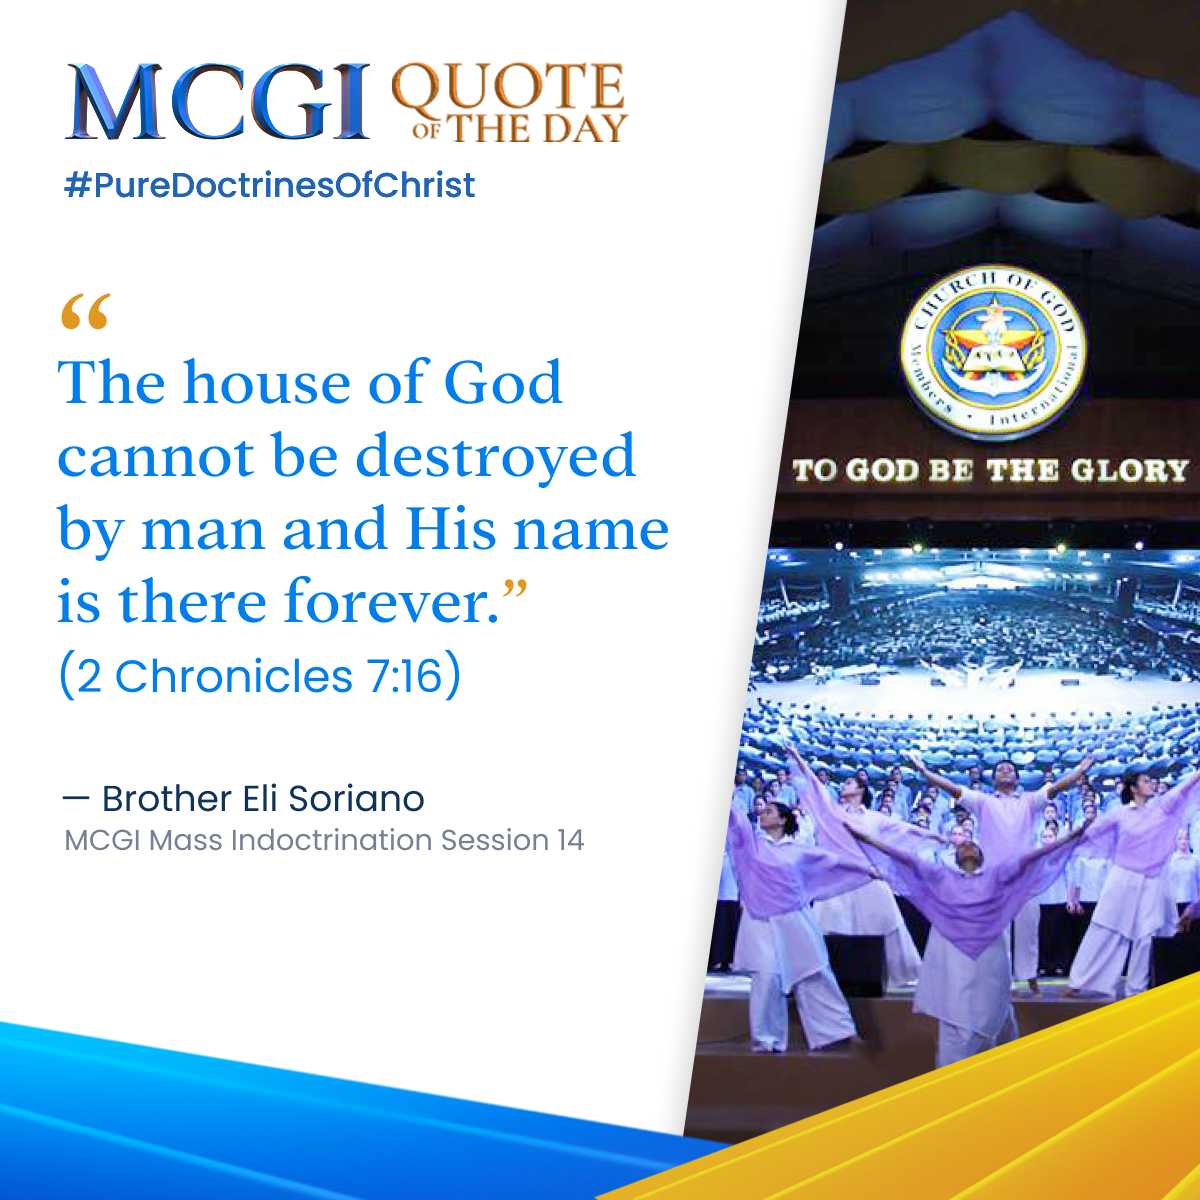 'The house of God cannot be destroyed by man and His name is there forever.' (2 Chronicles 7:16)

— Brother Eli Soriano, MCGI Mass Indoctrination Session 14

#ShiningWithLove
#MCGICares